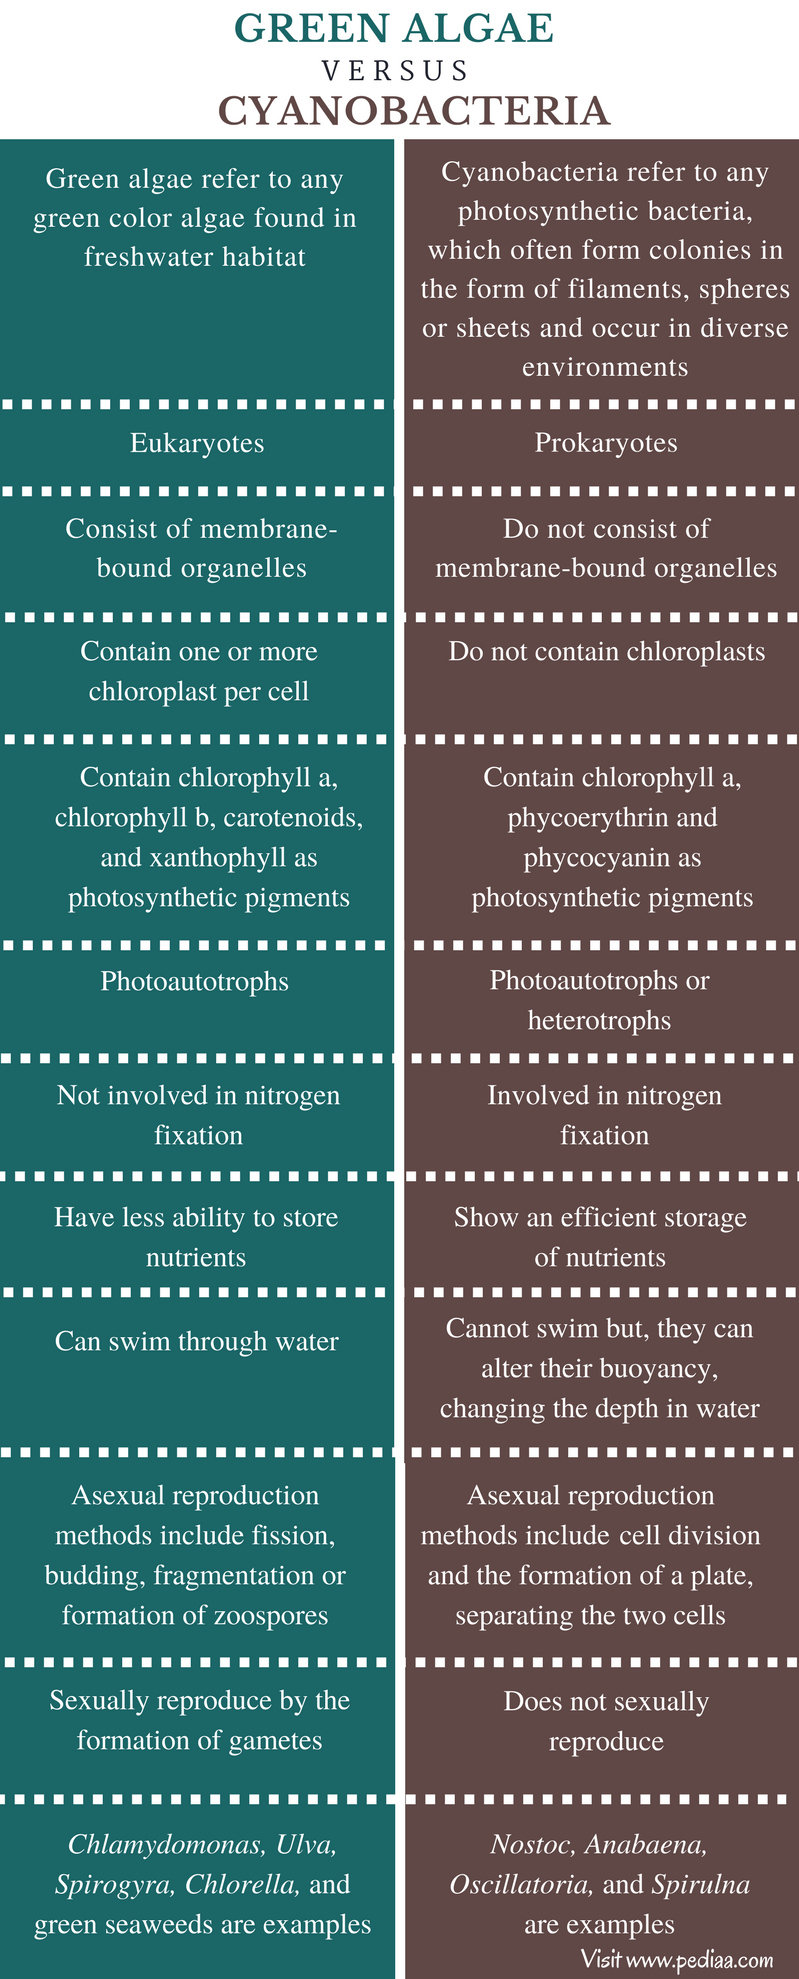 Difference Between Green Algae and Cyanobacteria - Comparison Summary